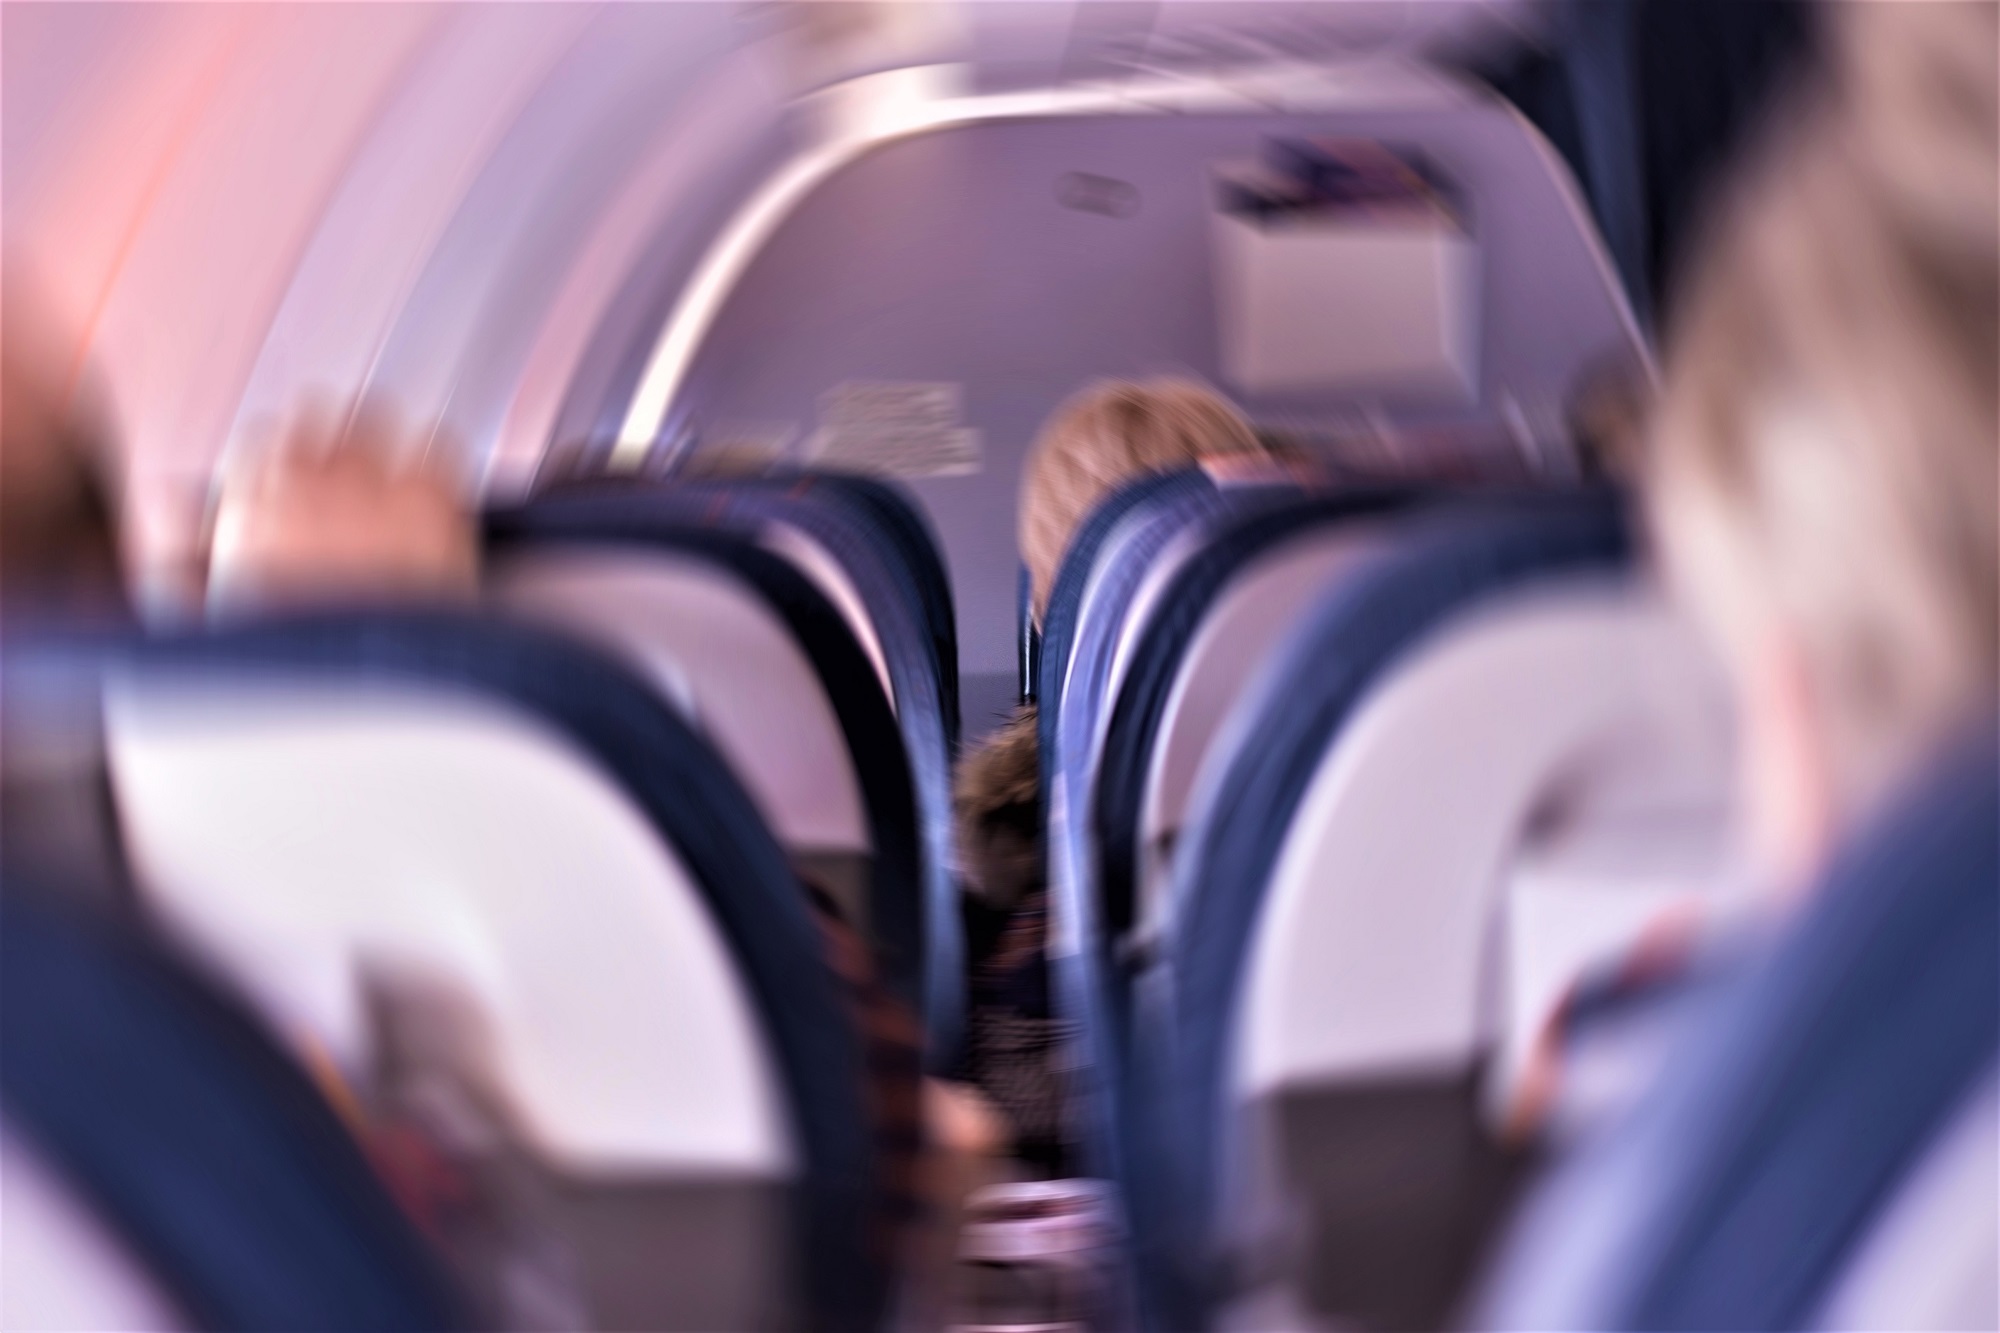 Safe alternatives to using that disgusting seat pocket on a plane - The  Travel 100